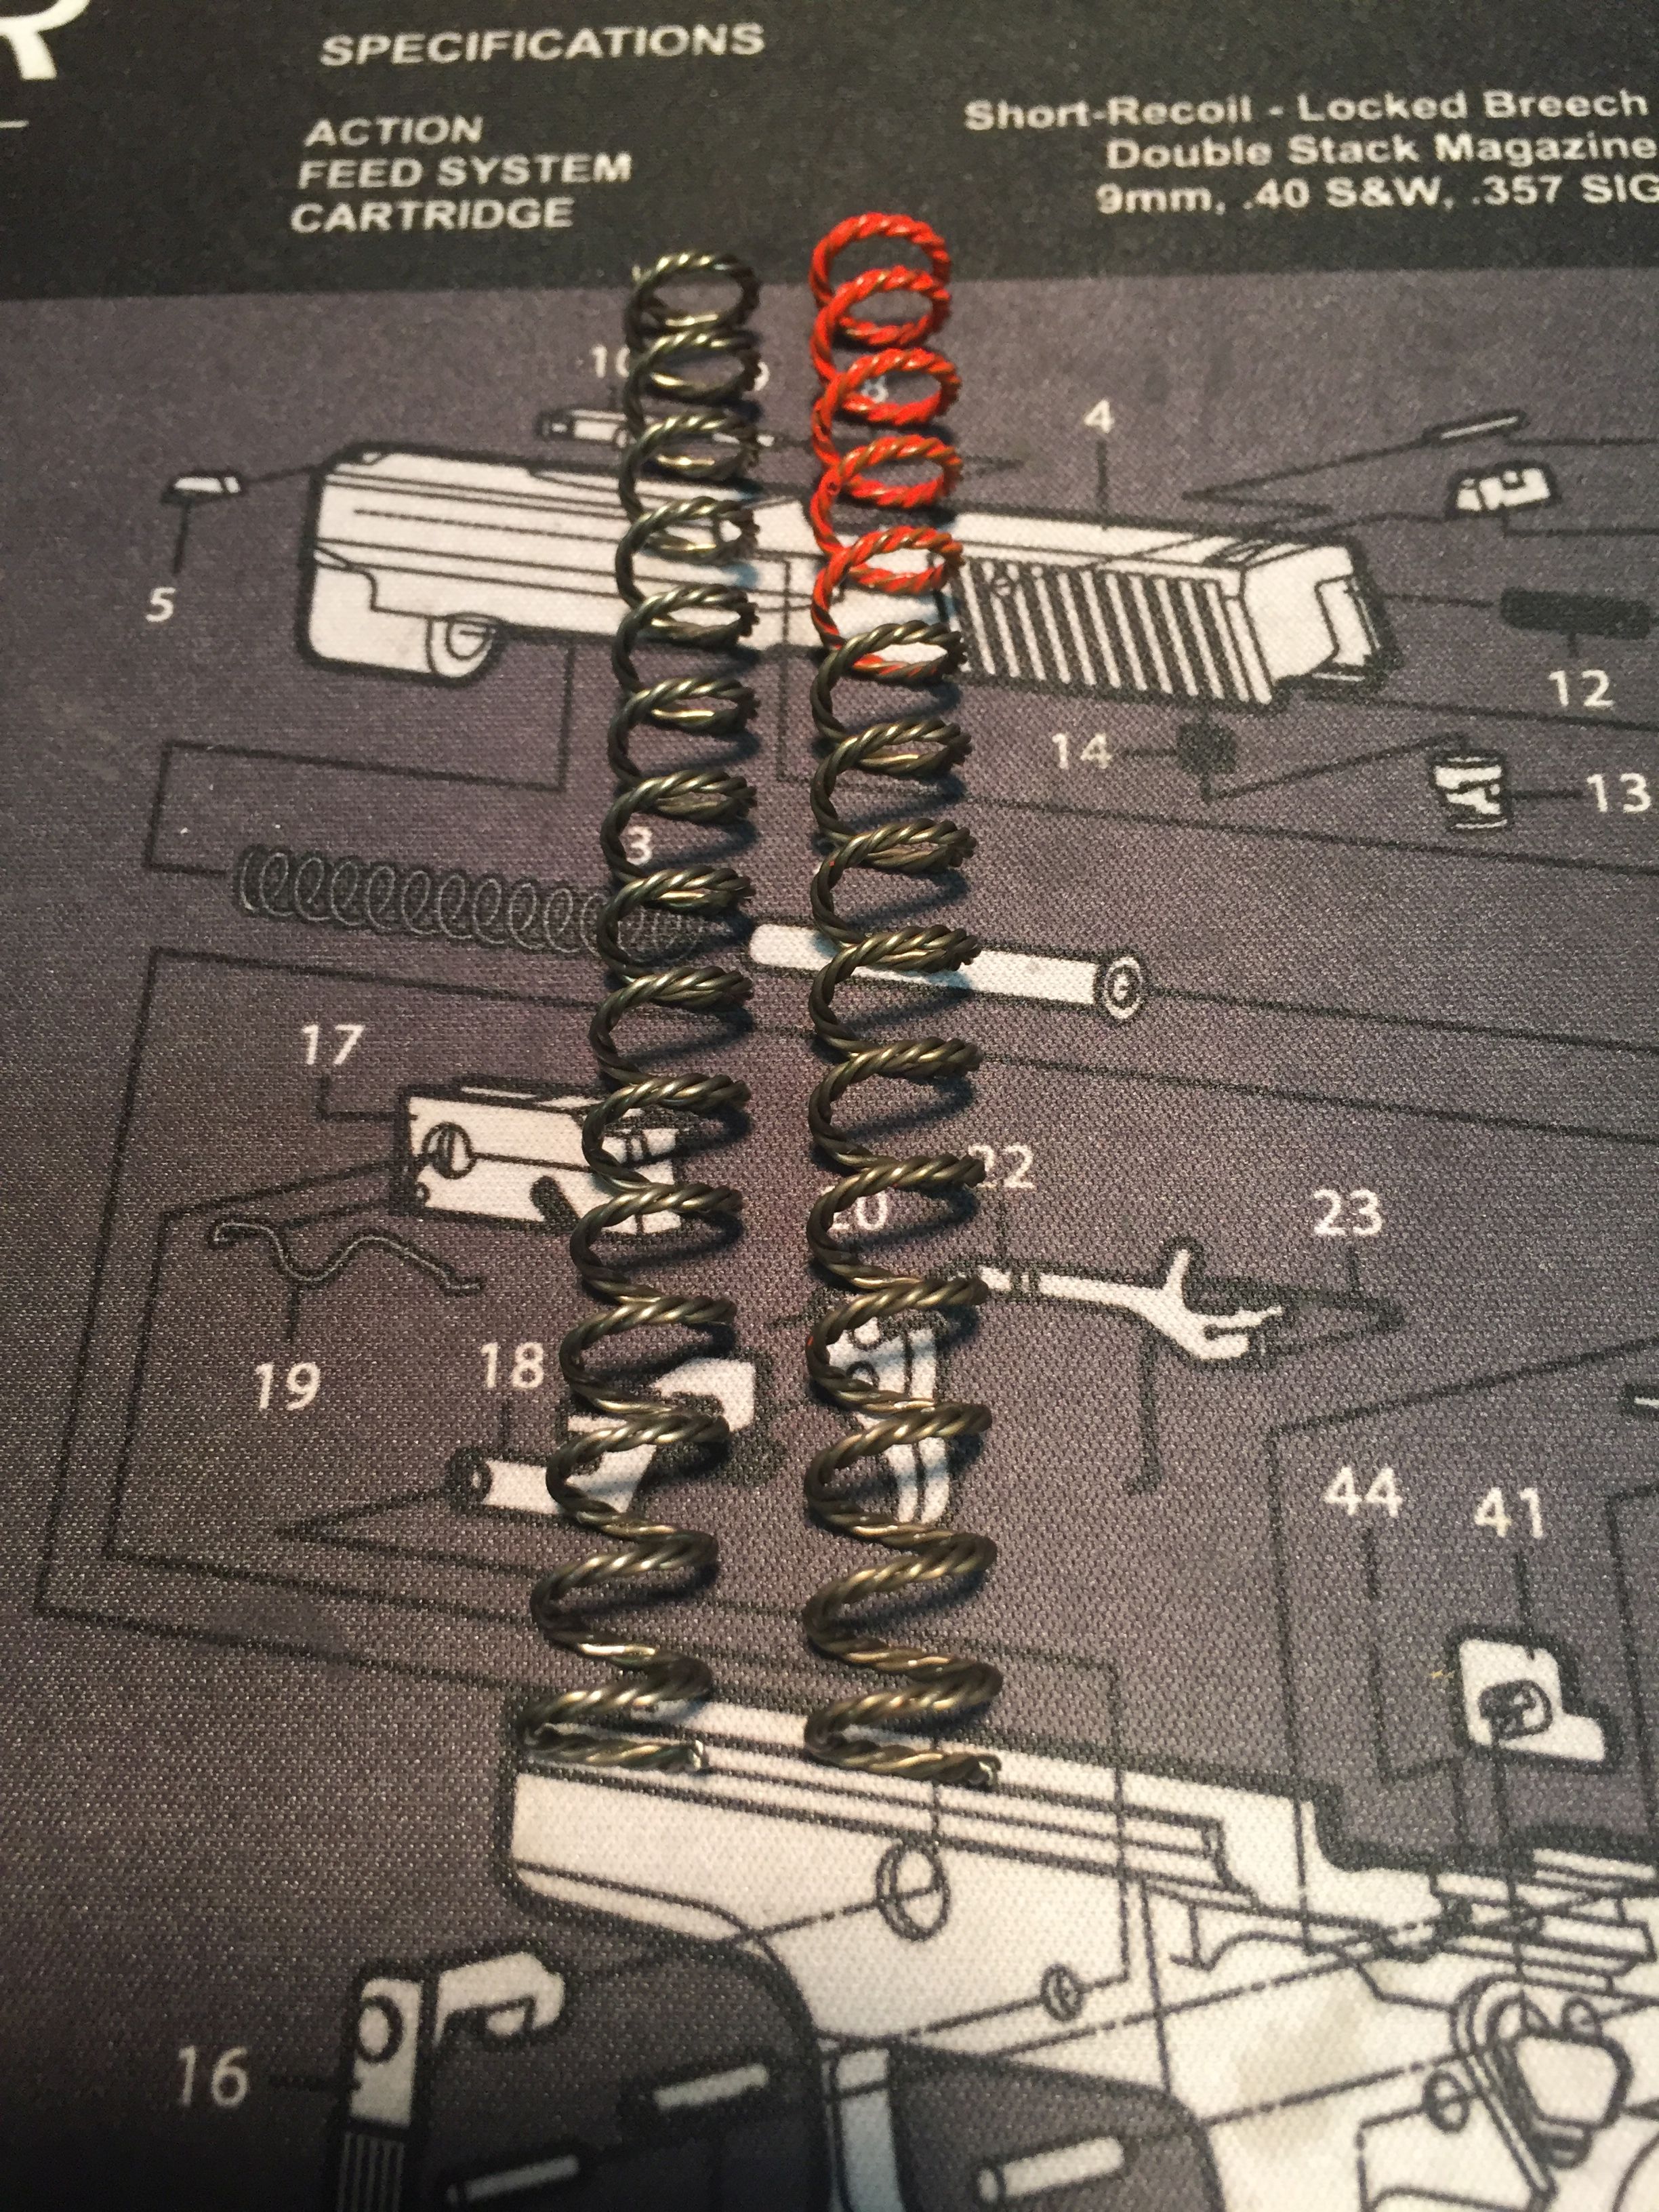 sig sauer p226 recoil spring guide